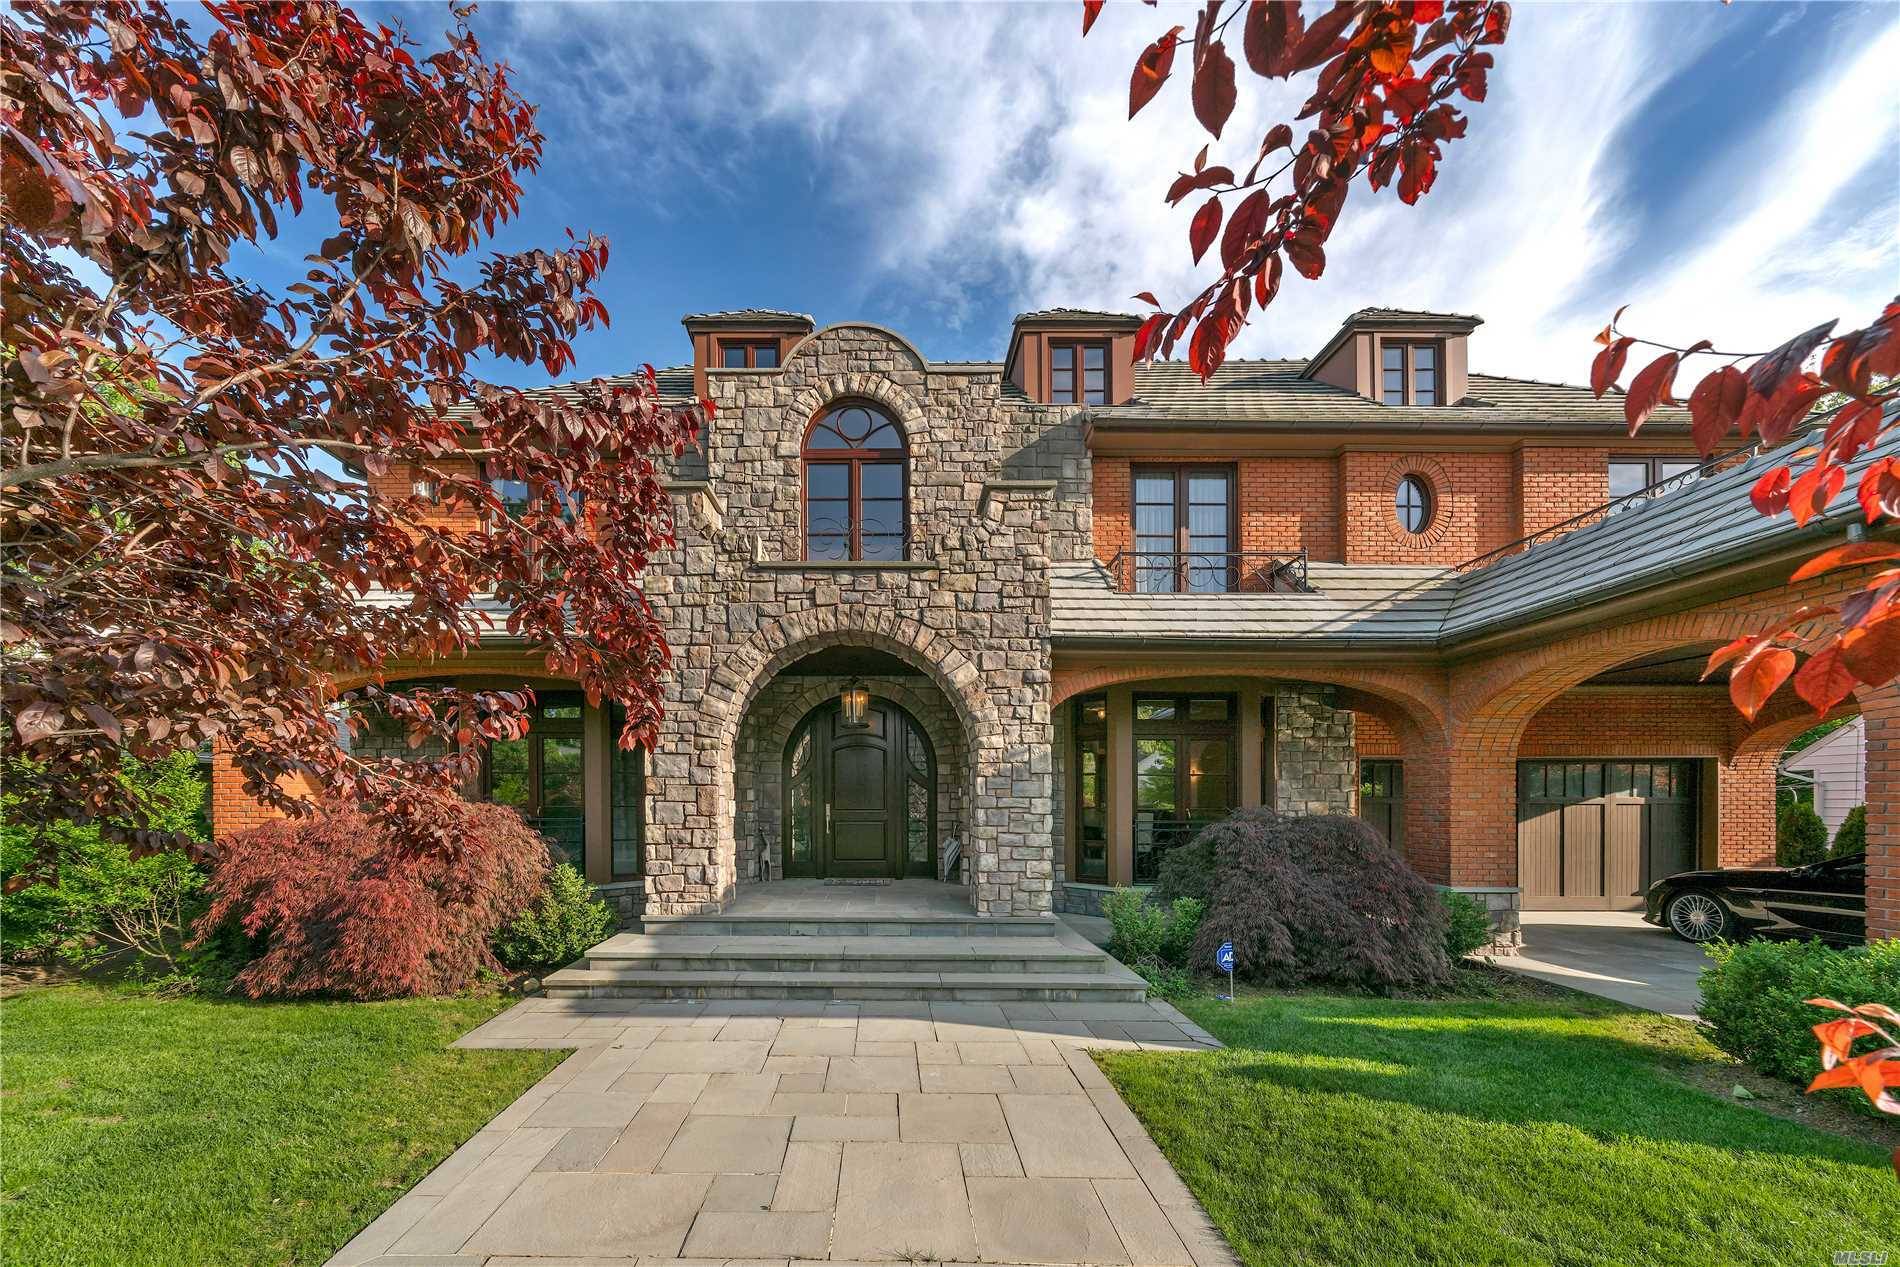 Custom Brick Colonial, On Almost Half An Acre Of Perfectly Manicured Property, In The Heart Of The Prestigious Village Of Kensington.